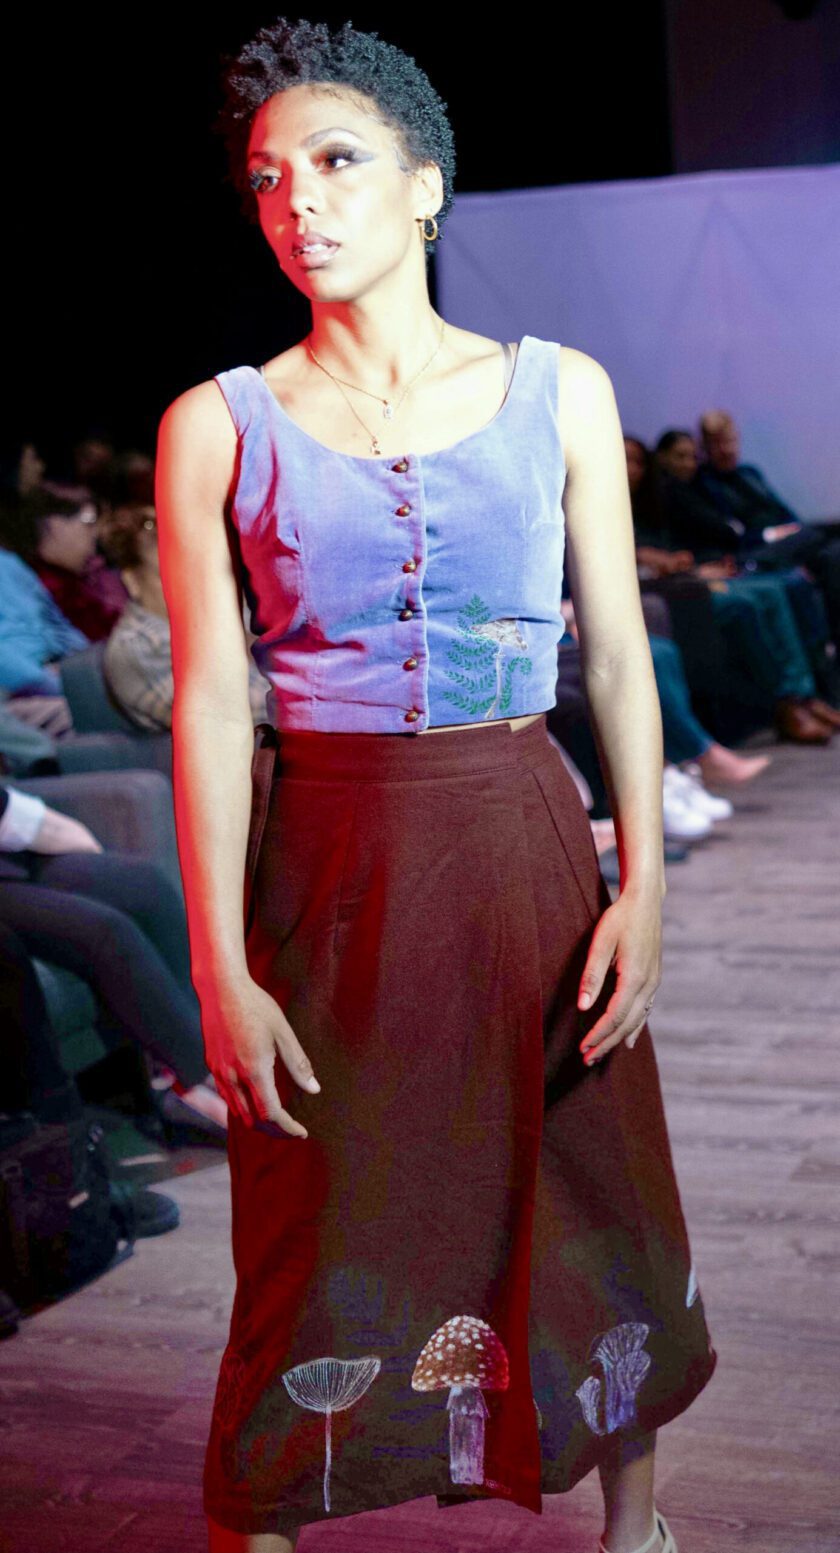 A woman wearing a skirt and top on a runway.